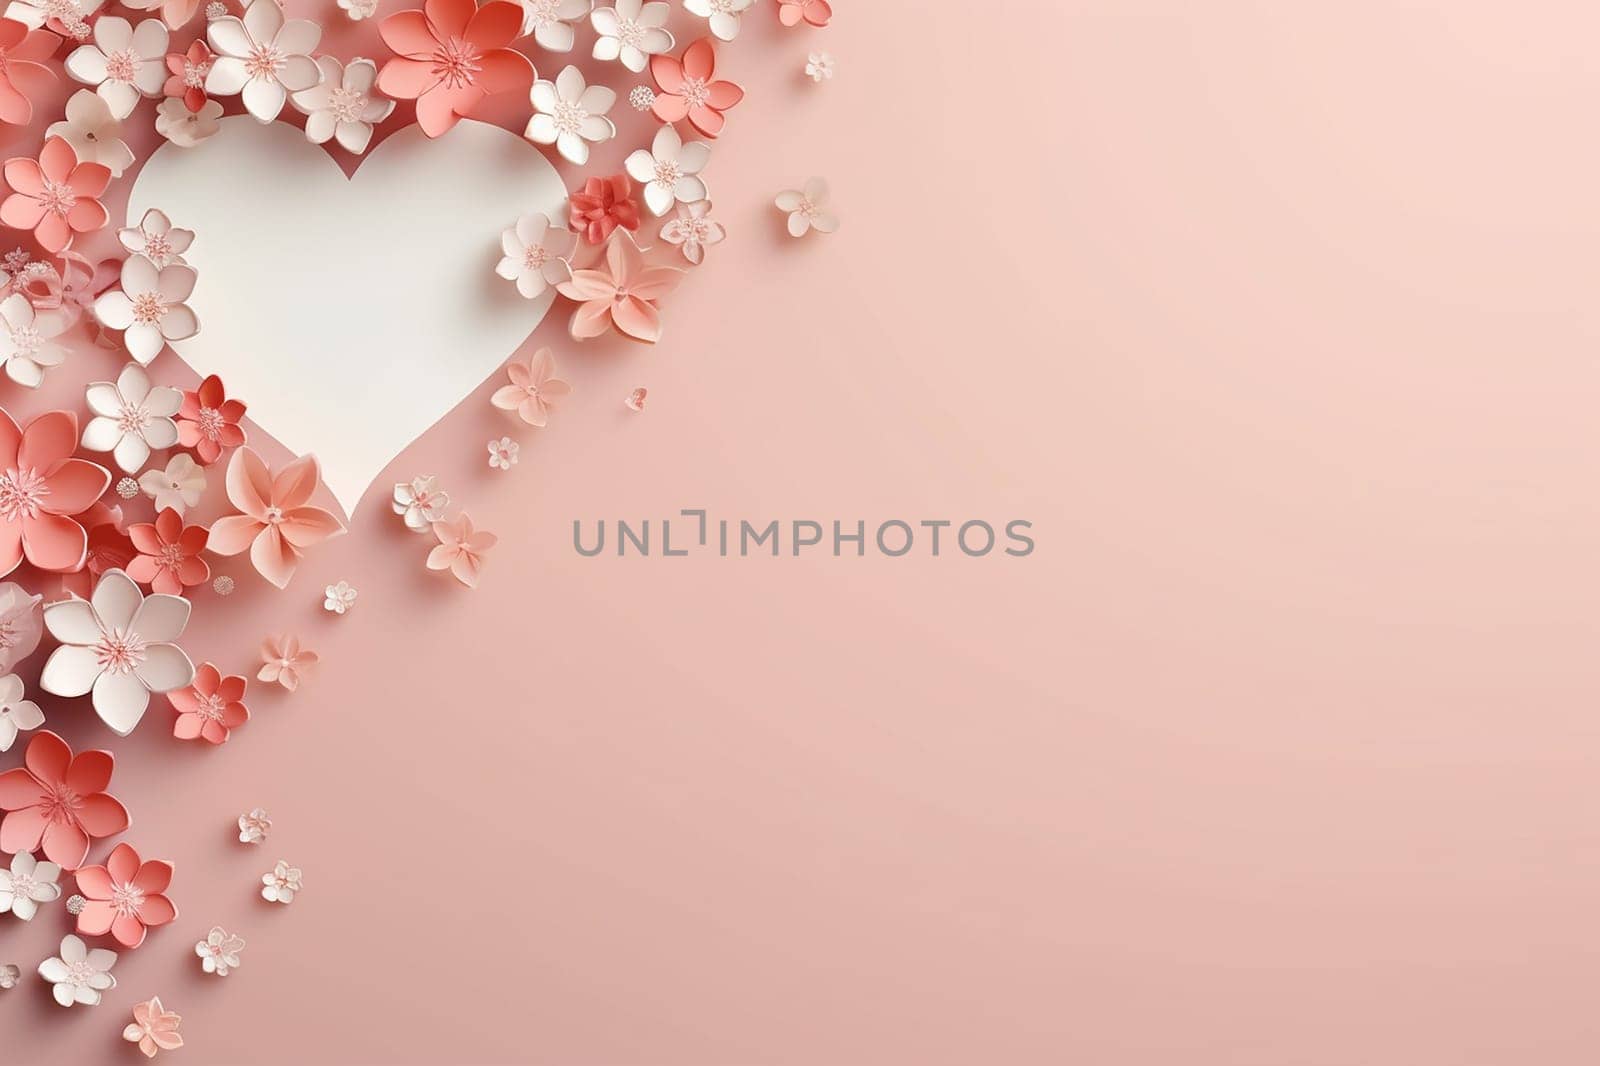 Pink background with heart shape surrounded by flowers by Hype2art